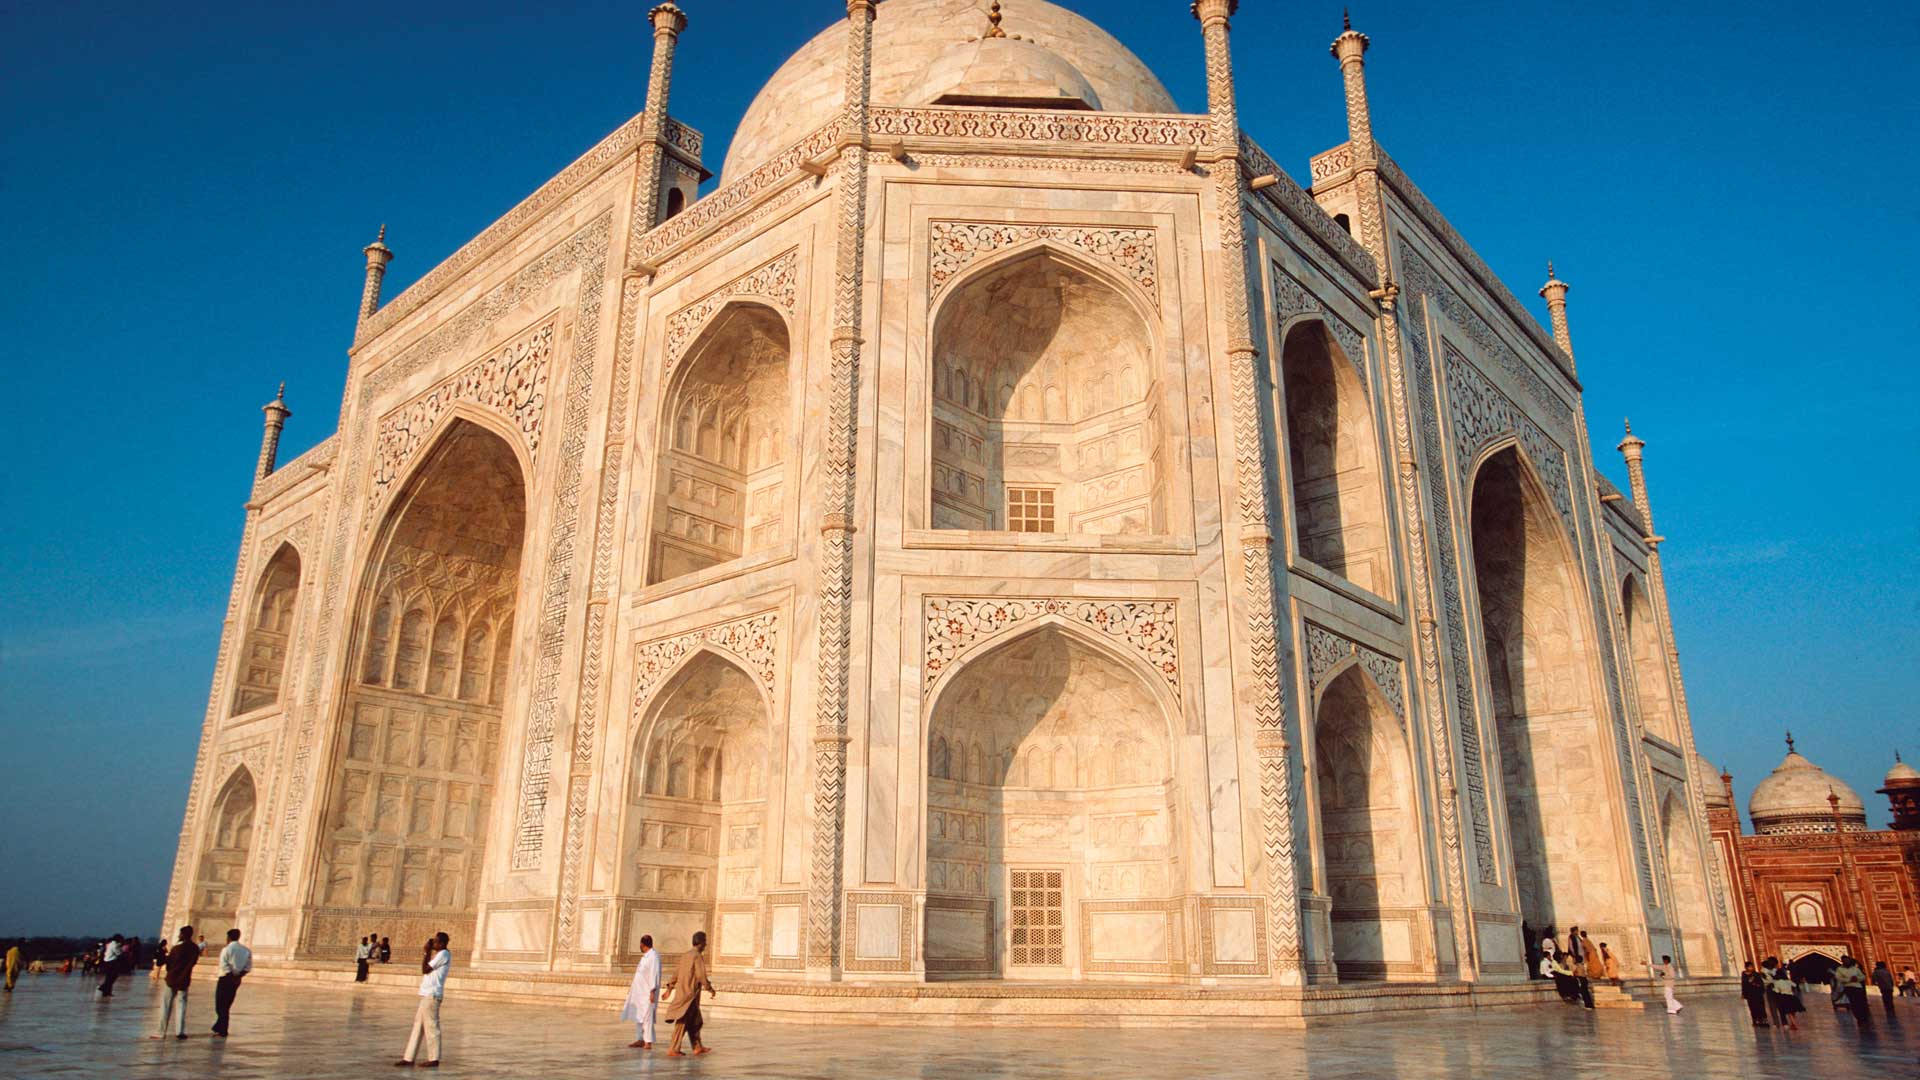 The marble exterior of the Taj Mahal, built by Shah Jahan, India with GeoEx